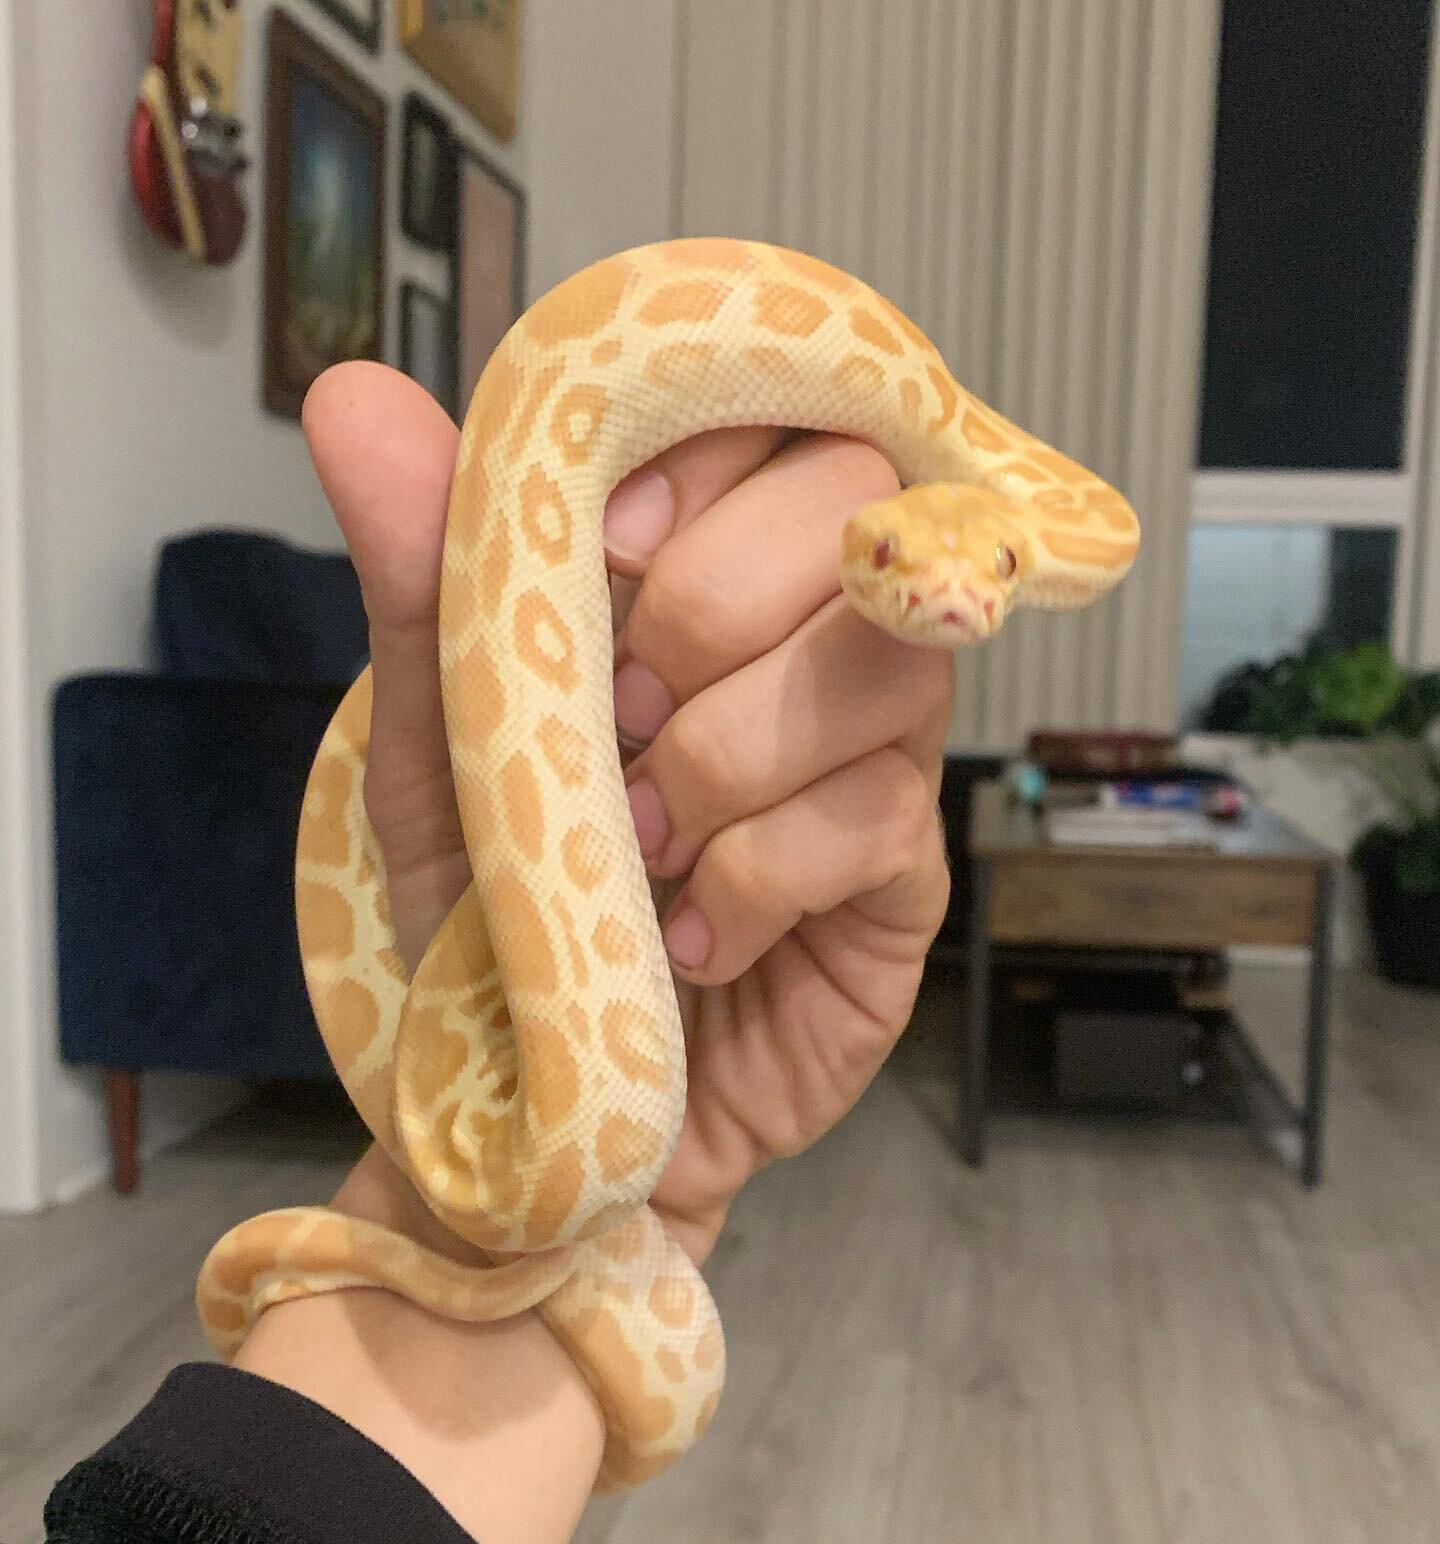 She&rsquo;s a little fire cracker 🧨 I introduced her on my story last week after she arrived&hellip;.And many of you guessed the species and morph perfectly! 😎 She&rsquo;s a 1/4 Dwarf Pearl Burmese Python 🐍 She is also 50% het Granite&hellip;but u